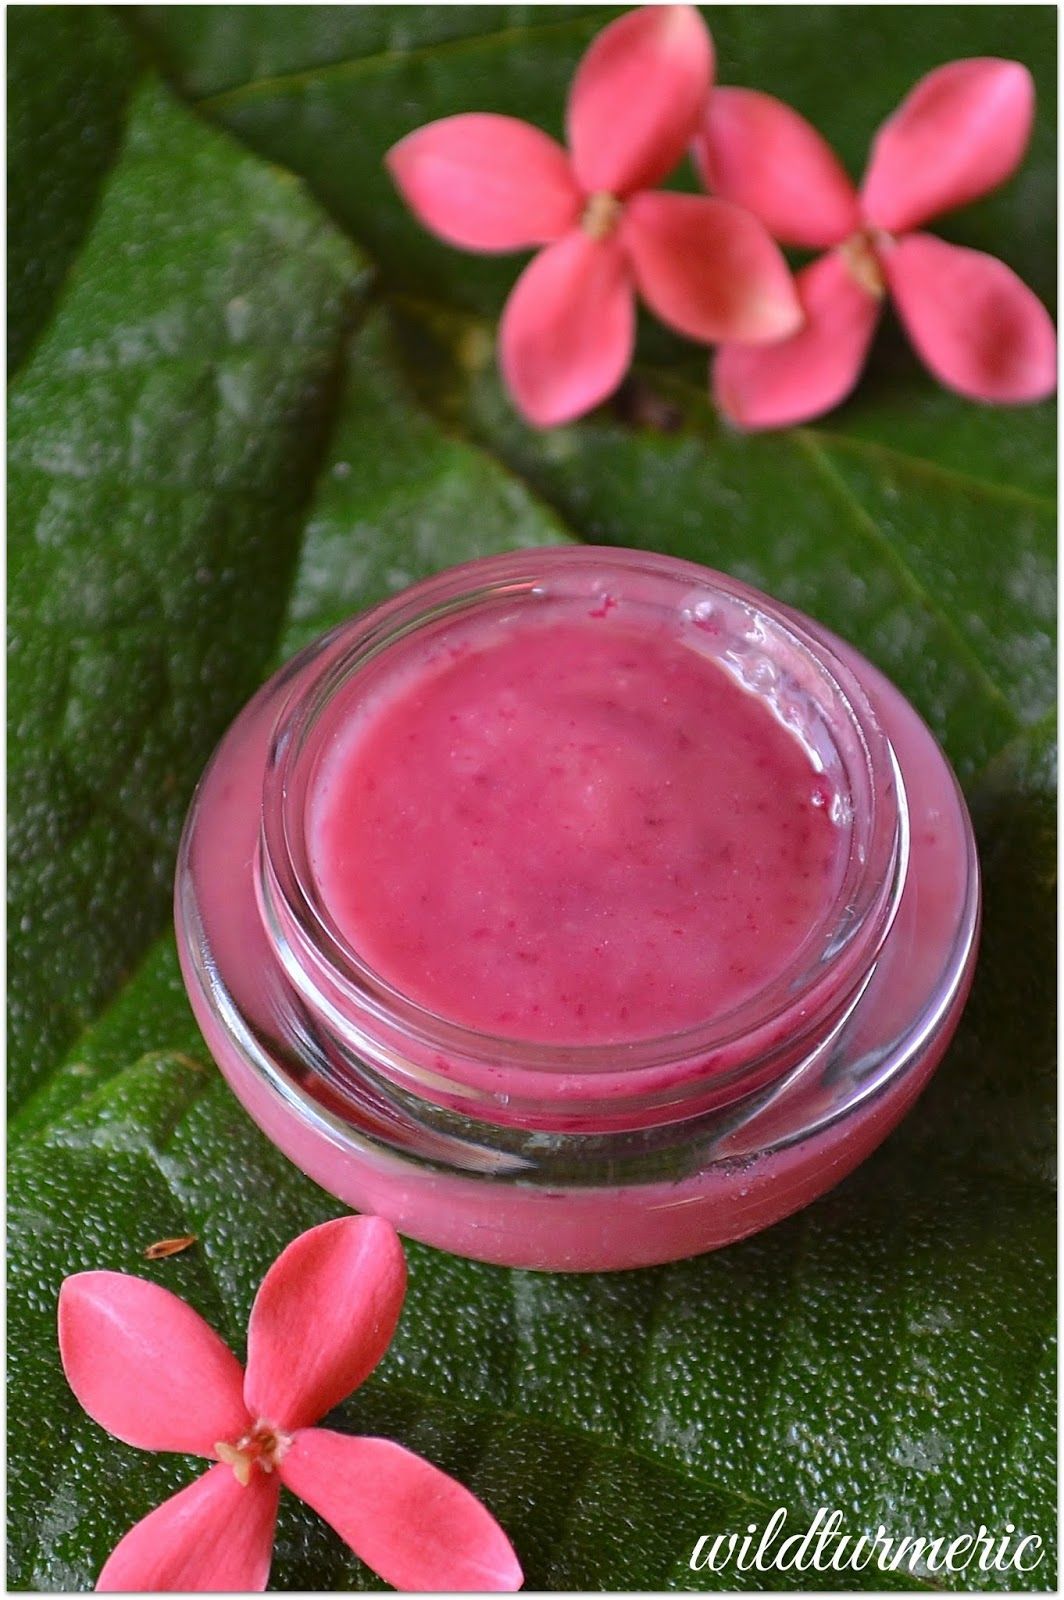 DIY How To Make Beetroot Lip Balm at Home For Pink Lips | Dark Lips Remedy - Wildturmeric - DIY How To Make Beetroot Lip Balm at Home For Pink Lips | Dark Lips Remedy - Wildturmeric -   15 beauty Lips dark ideas